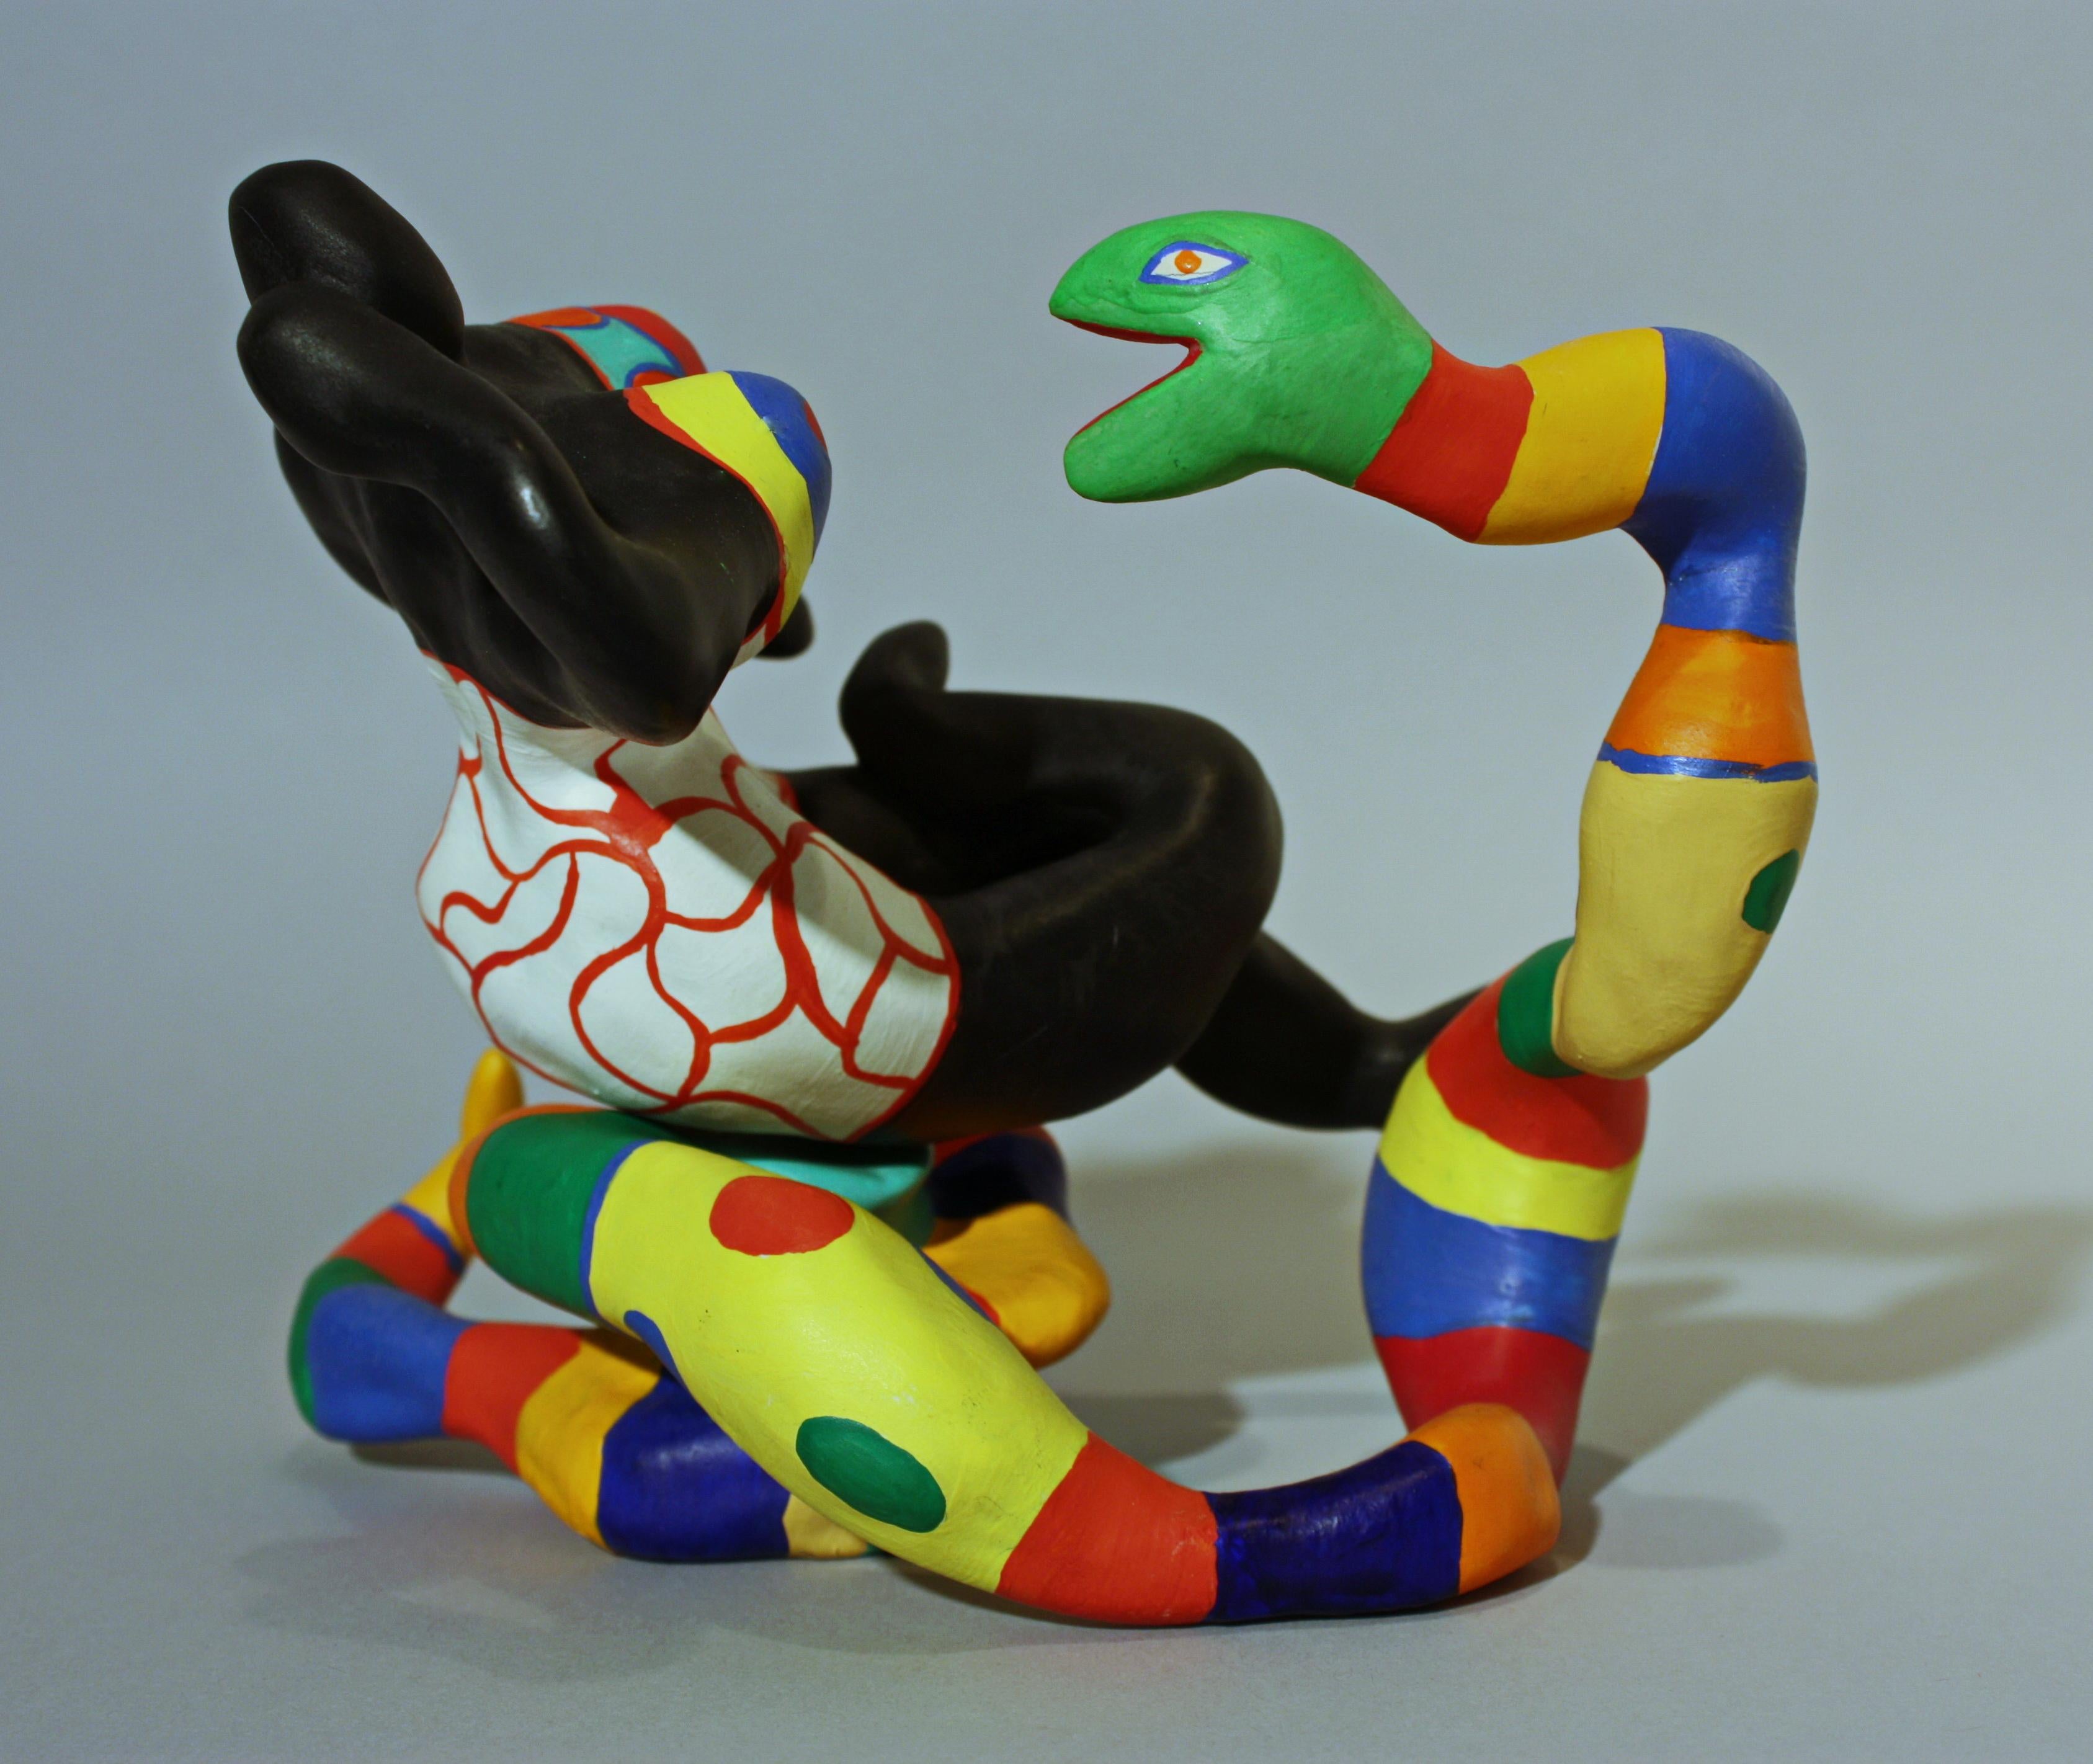 Niki de Saint Phalle, Nana Sitting on a Snake
1984
Resin sculpture hand painted by the artist, signed and numbered at the base below.
Original work of 7 copies.

Niki de Saint Phalle is a French artist known for her colorful sculptural female